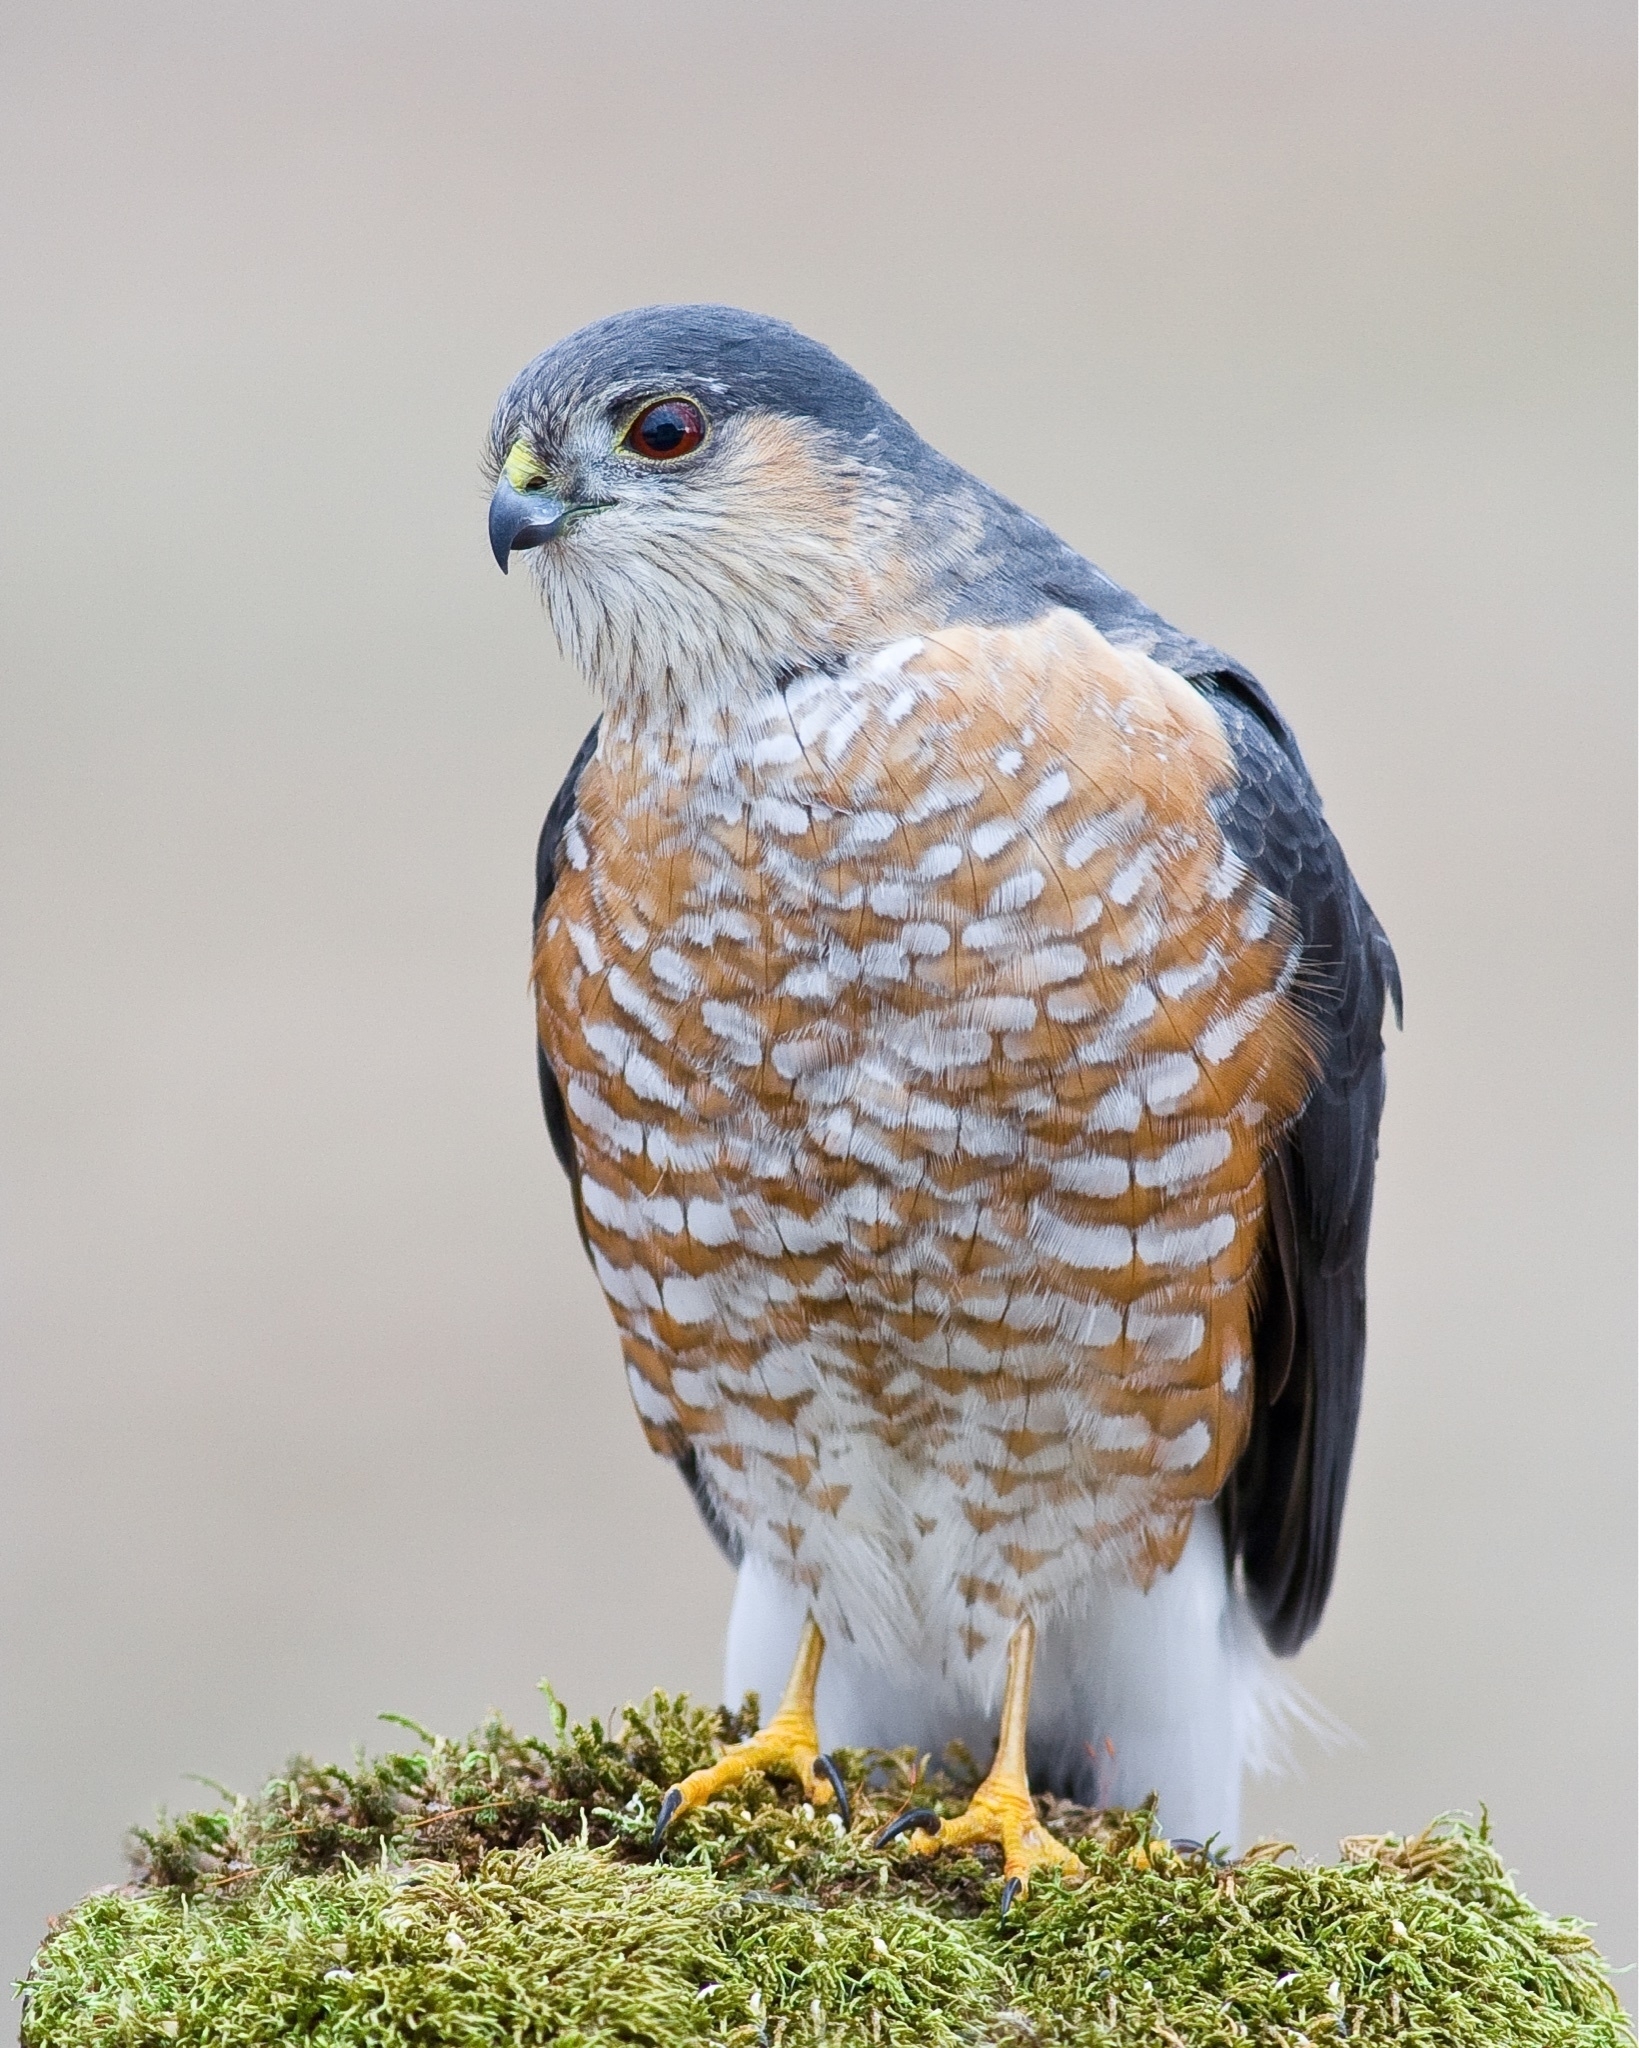 A hawk with orange and white chest feathers and bluish gray feathers on the top and back of it's head and body is perched on moss. It's small beak is bluish with just a small portion of yellow. It's head is slightly tilted giving the impression that it is looking at the camera.